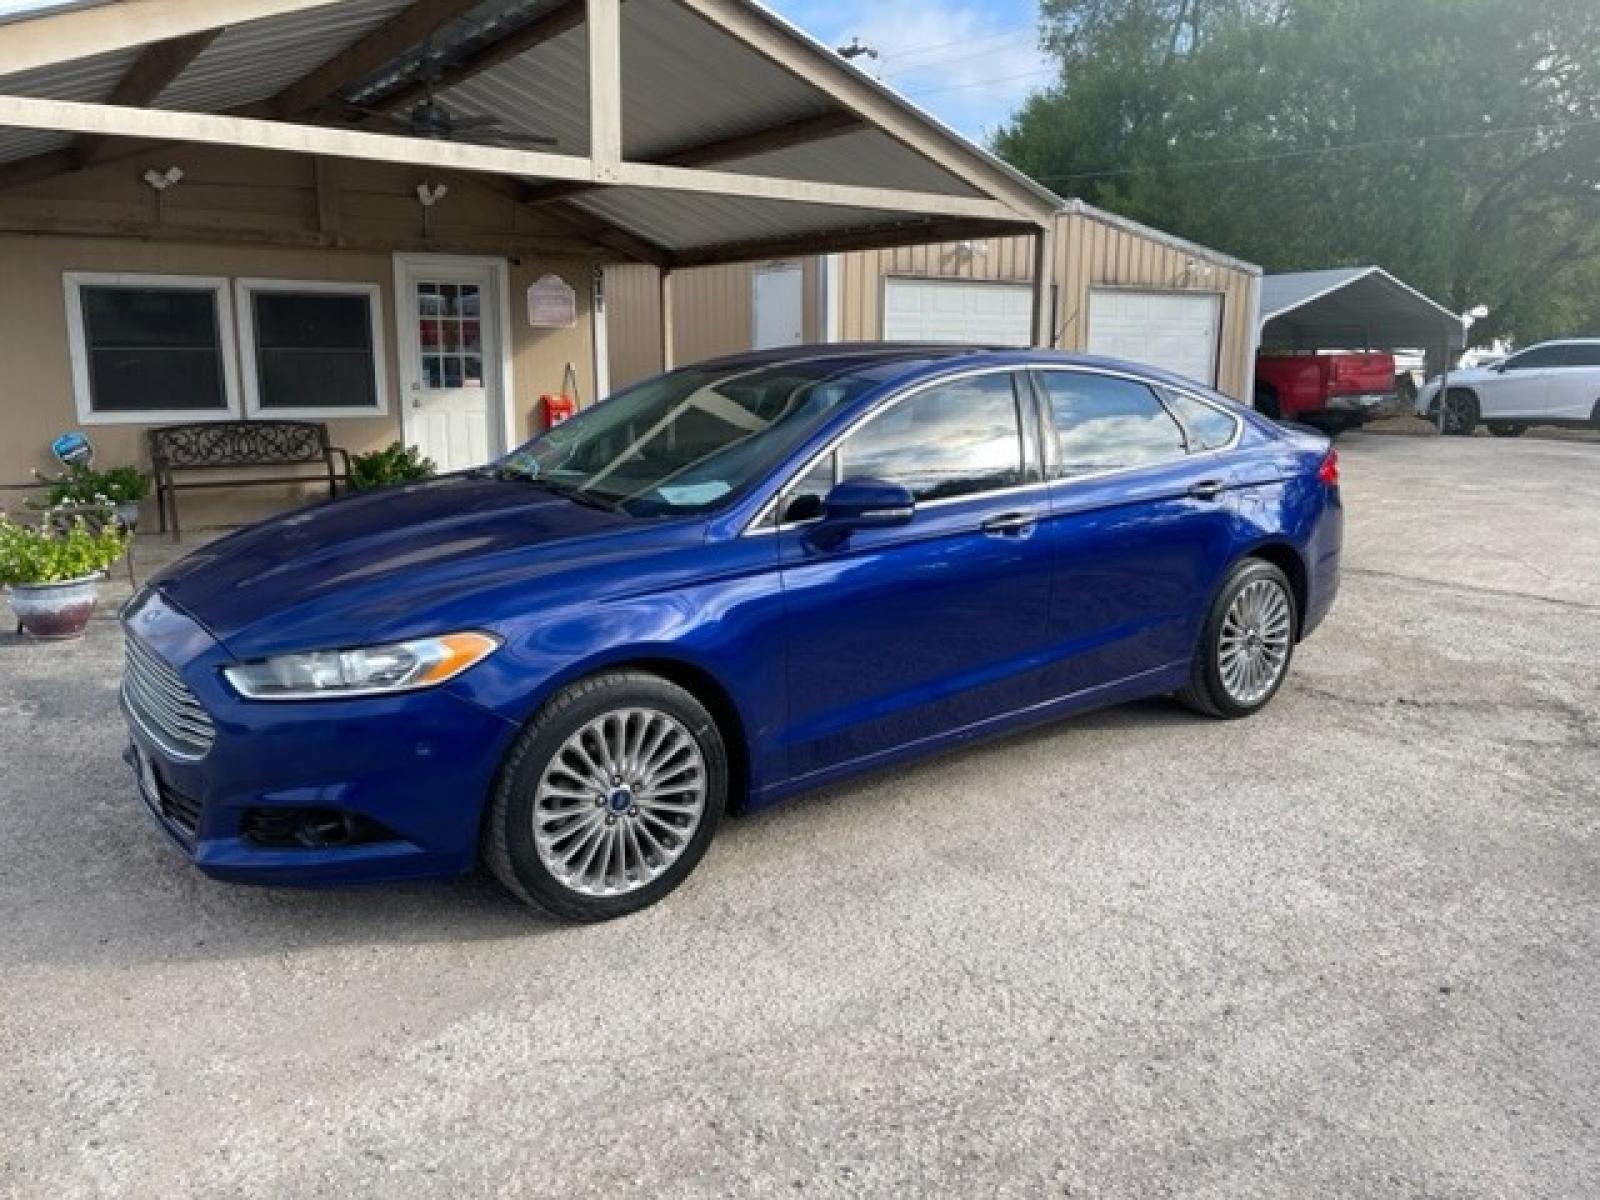 2014 BLUE FORD FUSION TITANIUM (3FA6P0D94ER) with an 2.0L engine, Automatic transmission - www.discountautosinc.com TEXT QUESTIONS TO 210-900-3118 41 MONTHLY PAYMENTS OF $340 WITH $2495 DOWN AND FINAL ODD PAYMENT OF $25.03 W/FIRST PAYMENT DUE 30 DAYS FROM DATE OF SALE. FEATURES: ALL WHEEL DR, BACK UP CAMERA, HEATED LEATHER SEATS WARRANTY ON ENGINE and TRANSMISSION O - Photo #0